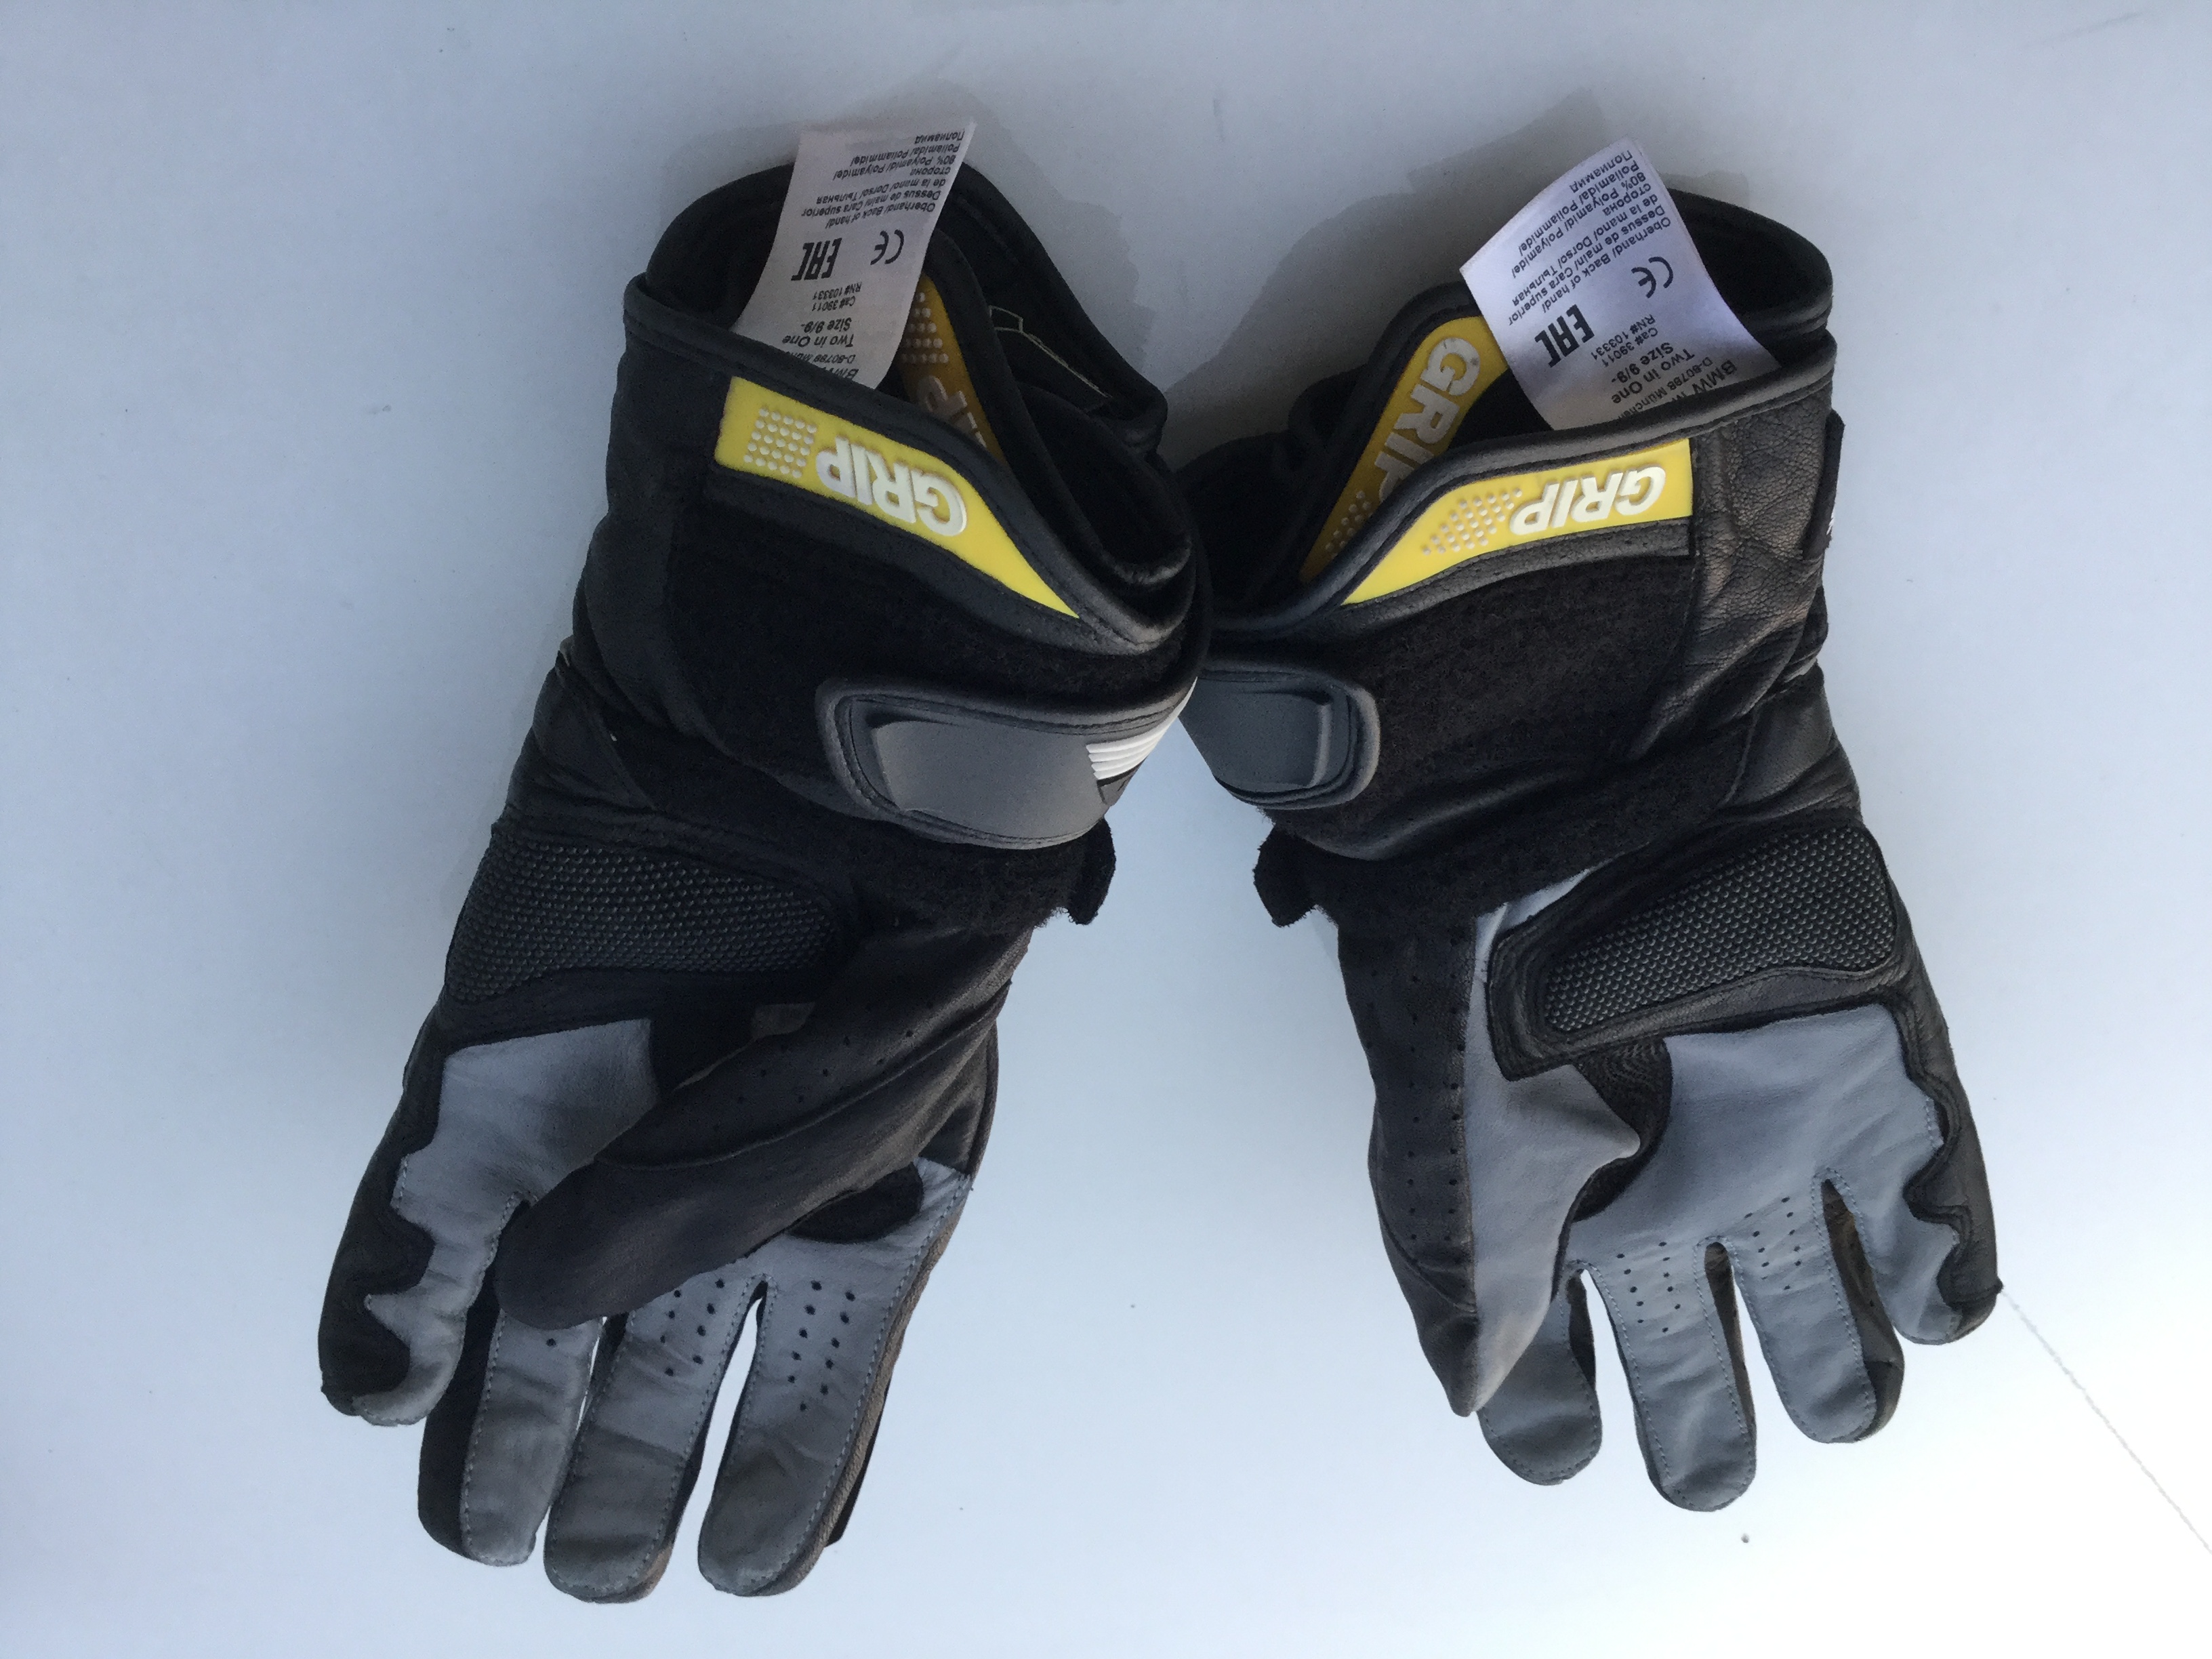 BMW Motorrad Gloves, 2 different pairs, as new - Harley Davidson Forums